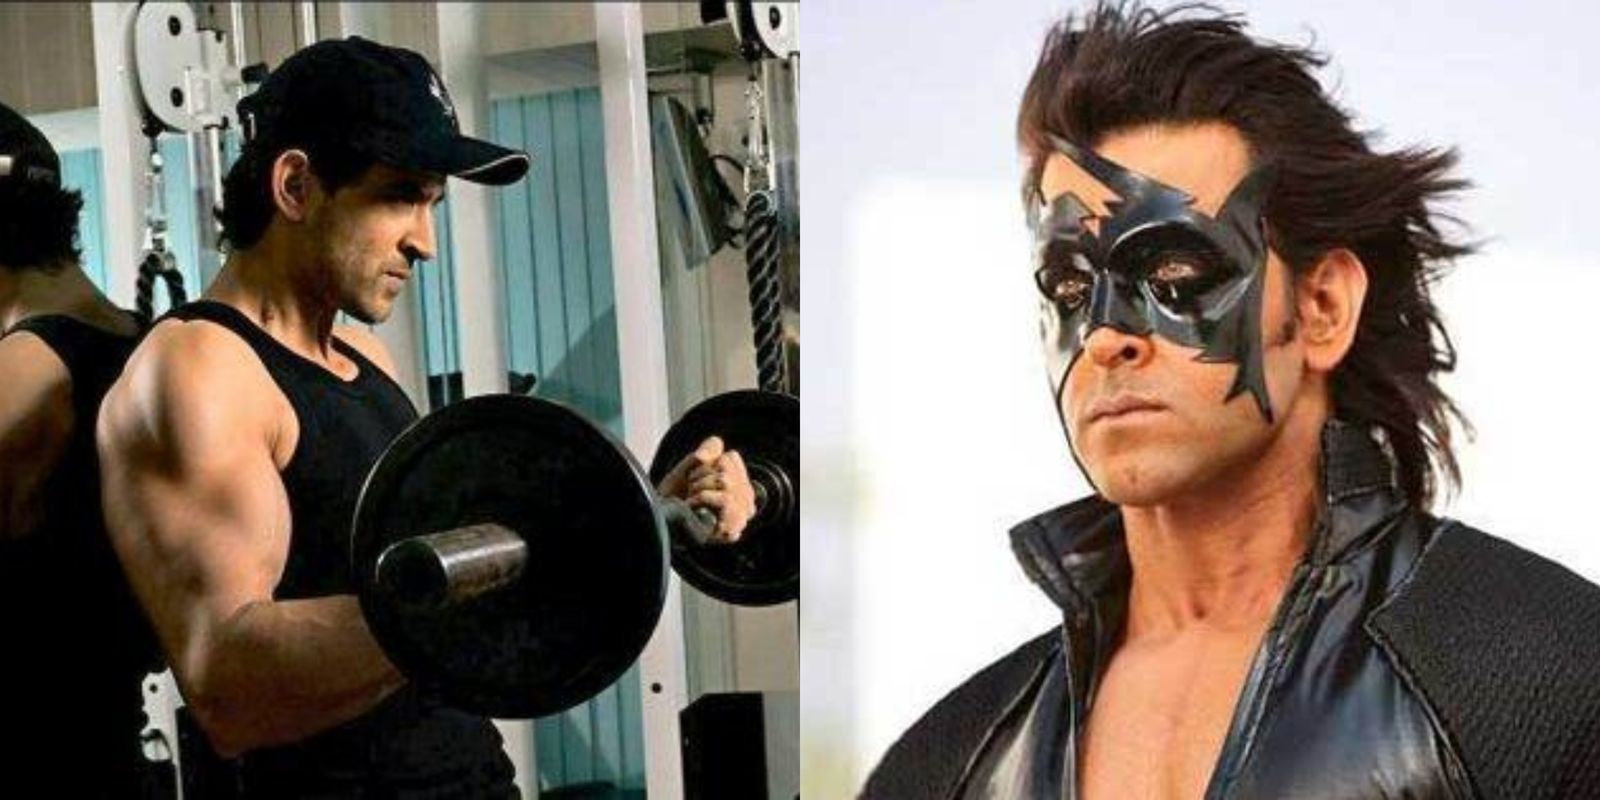 Hrithik Roshan Is Making The Most Of His Time During Lockdown With Books, Workouts And Krrish 4 Prep